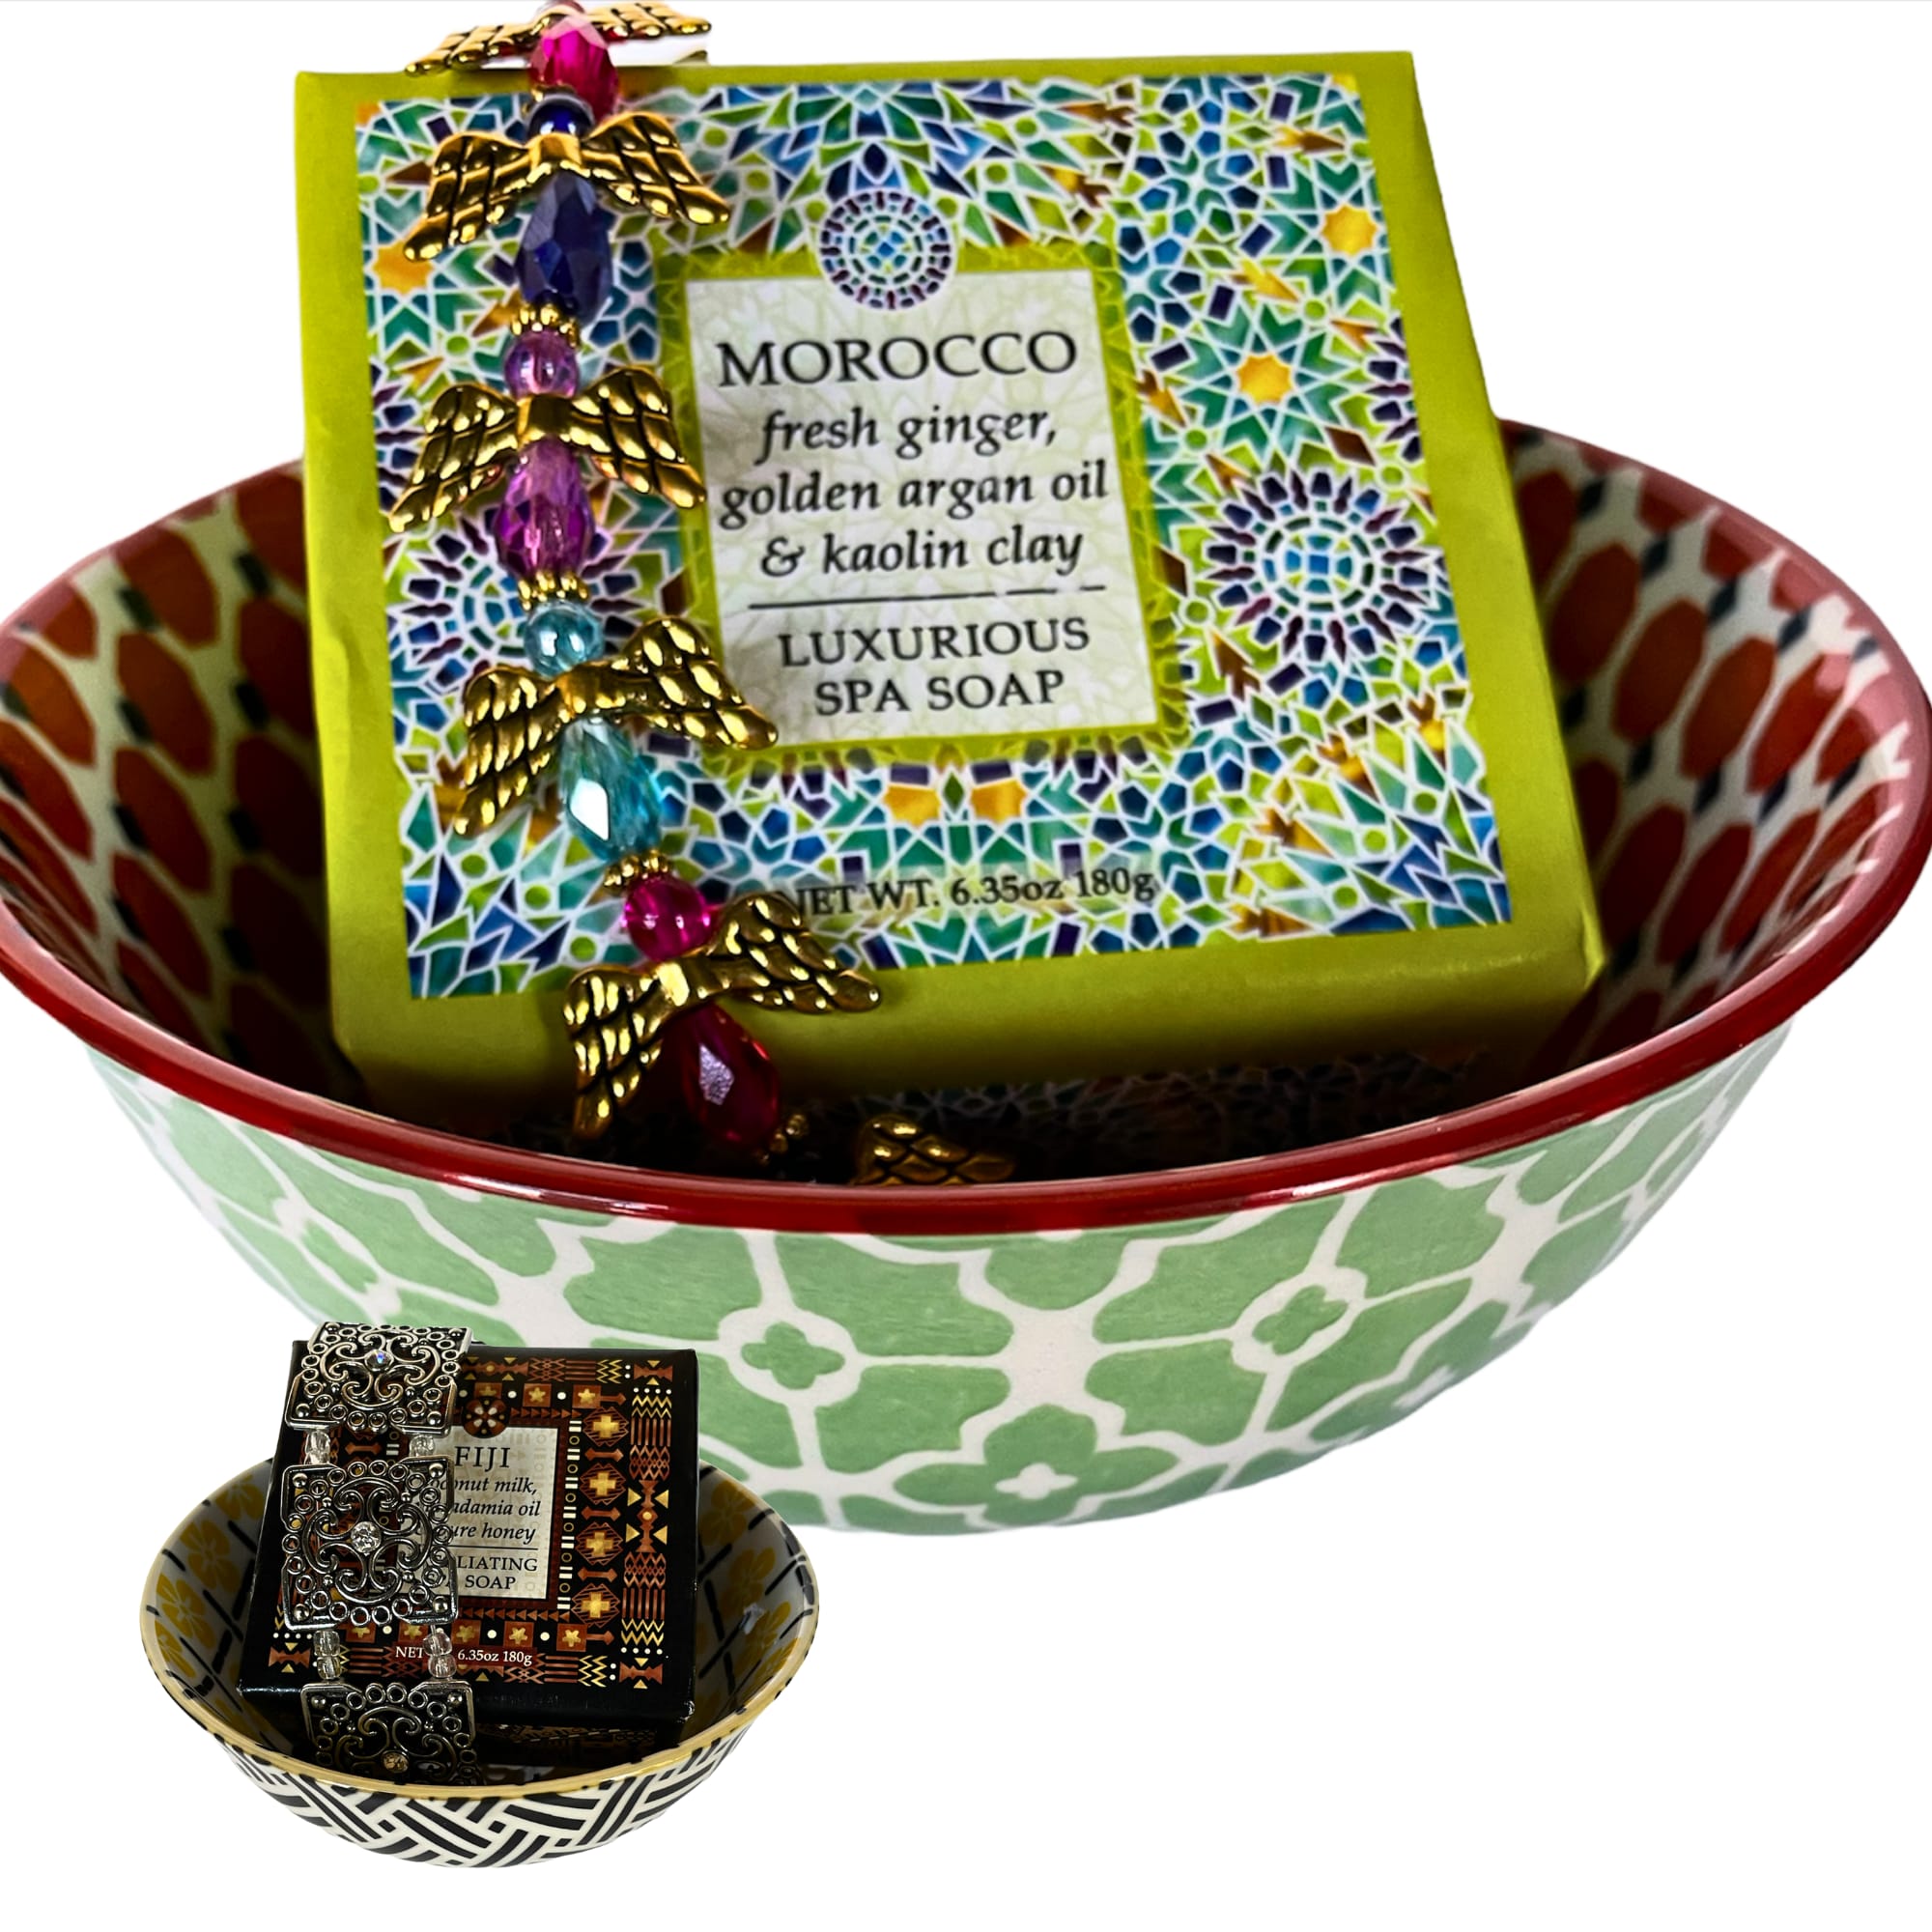 Artisan Handcrafted Bar Soap in Ceramic Dish - Artisan Handcrafted Bar Soap in Ceramic Dish